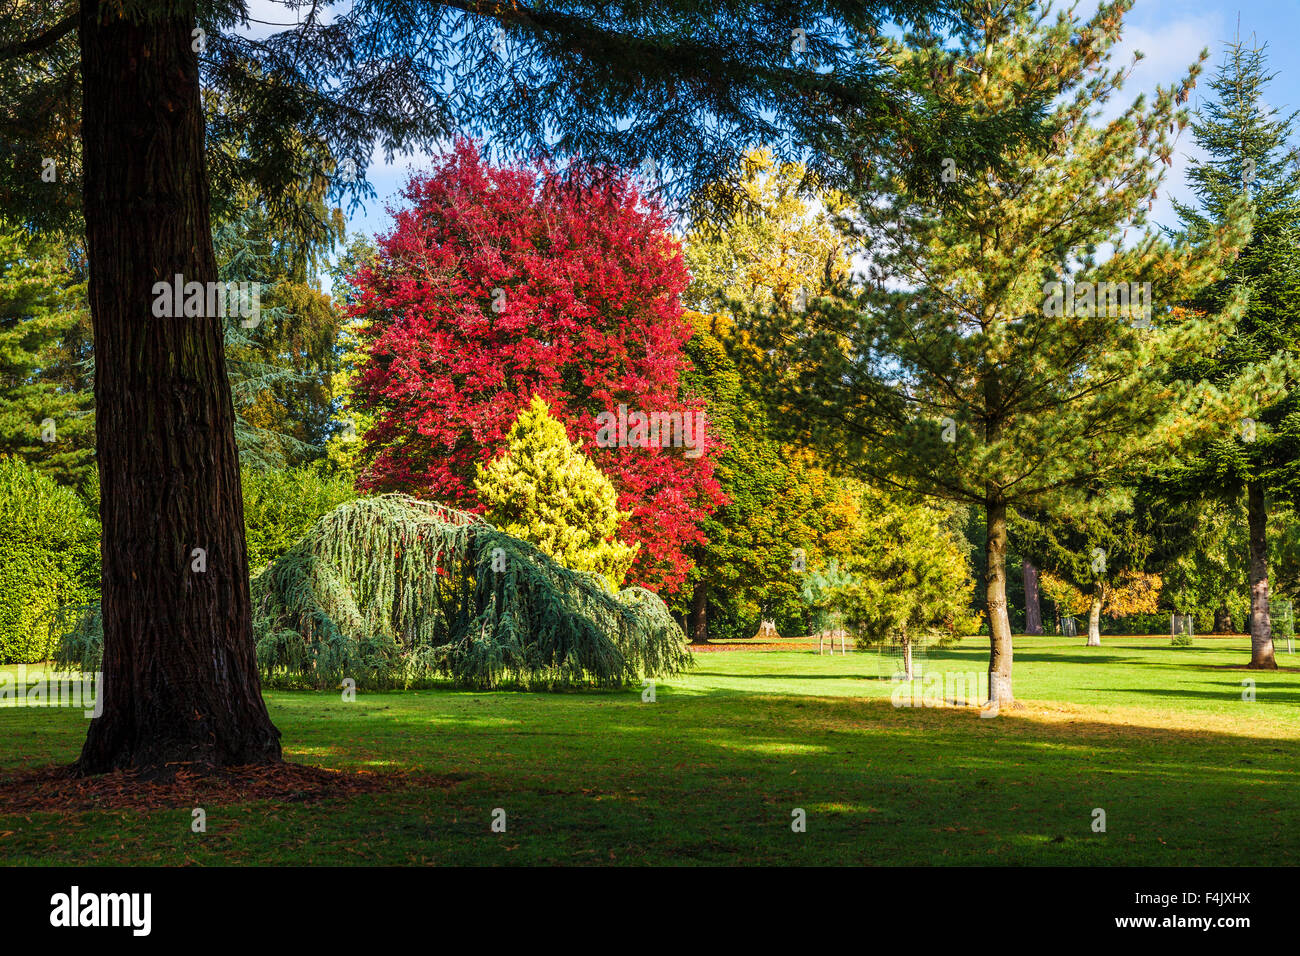 Autumn trees in the parkland of the Bowood Estate in Wiltshire. Sequoia sempervirens or Coast Redwood trunk in the foreground. Stock Photo